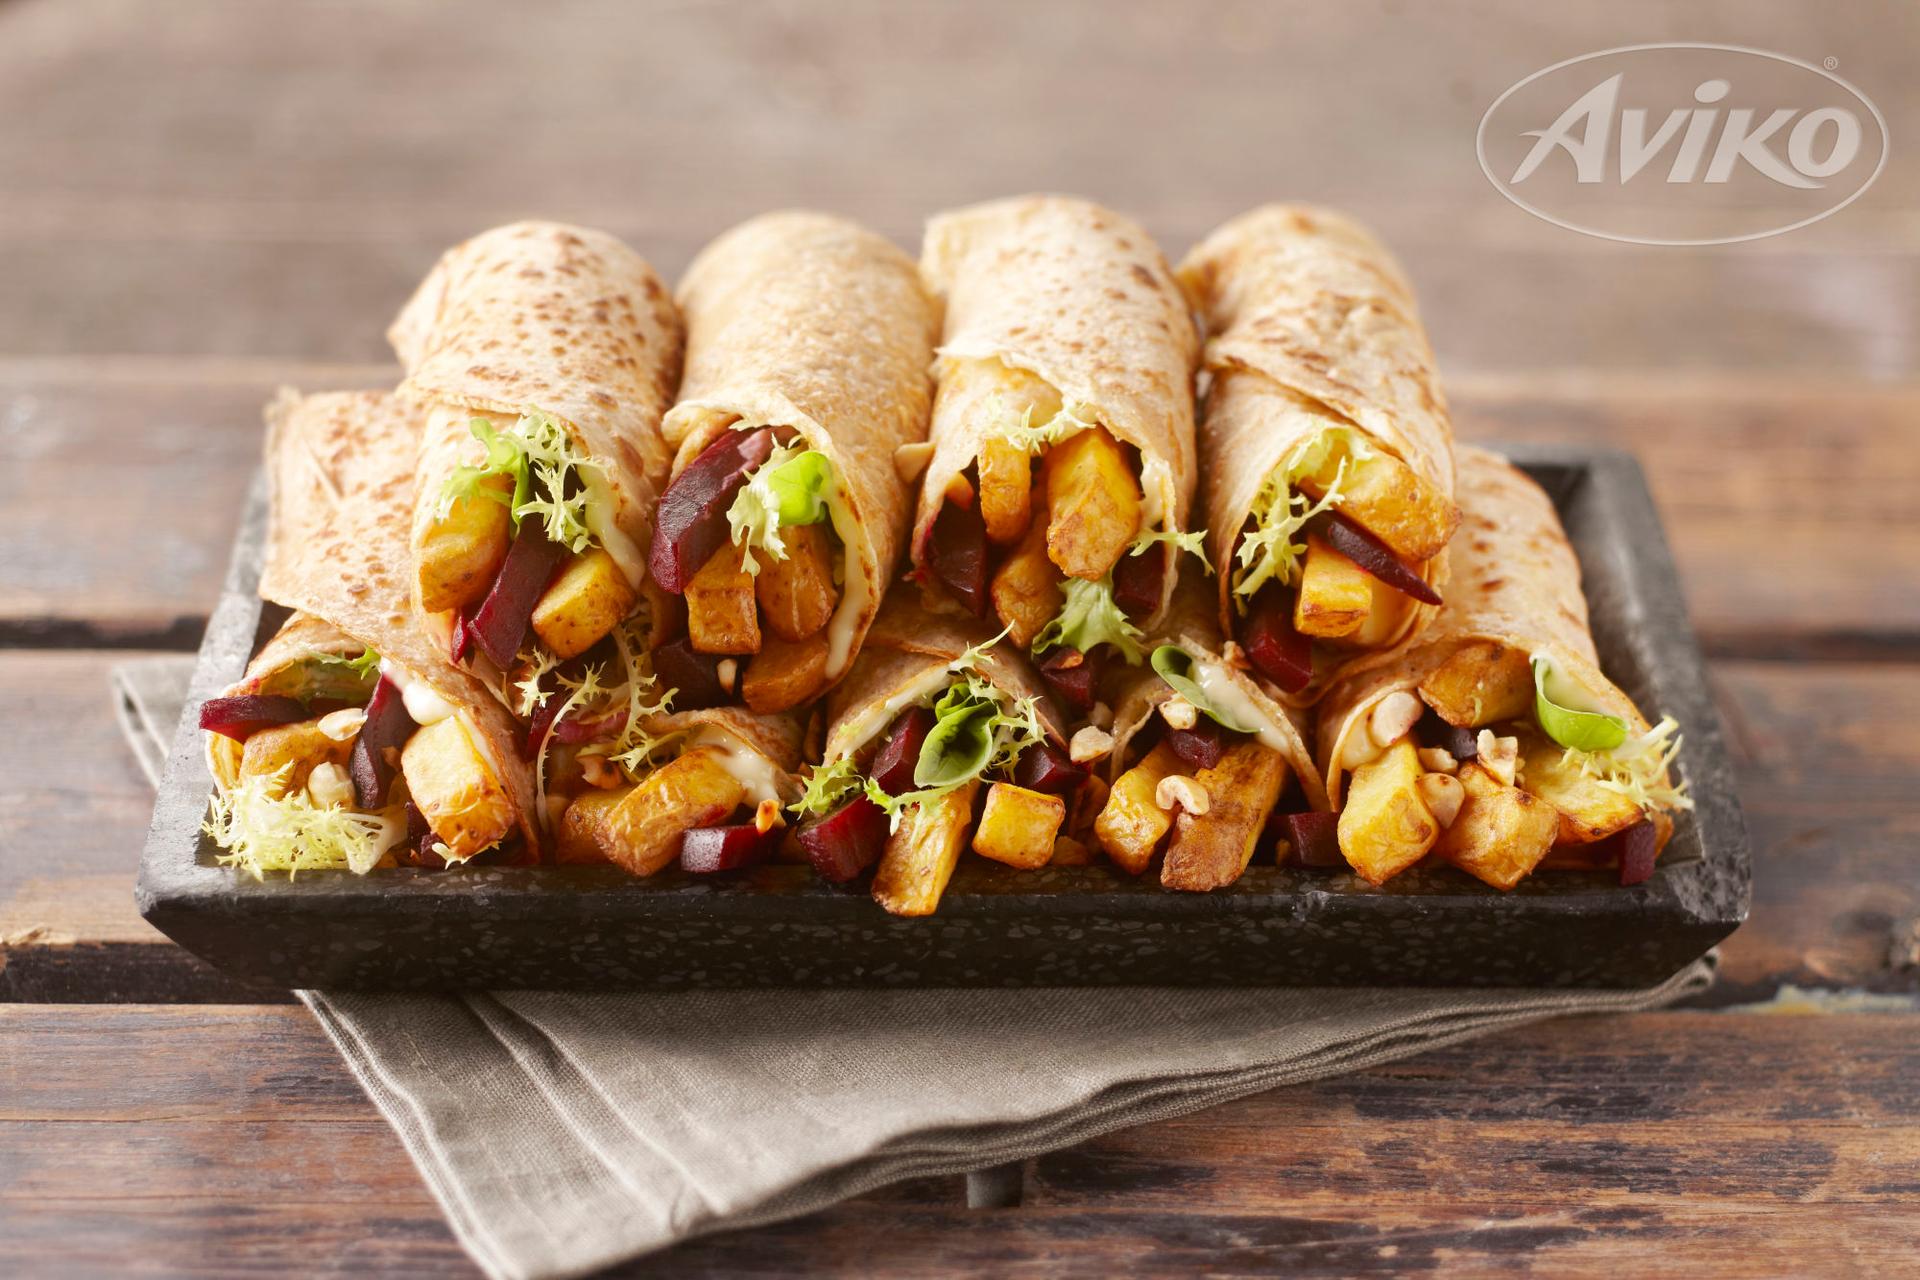 Aviko country cooking pure and rustic fries wrap